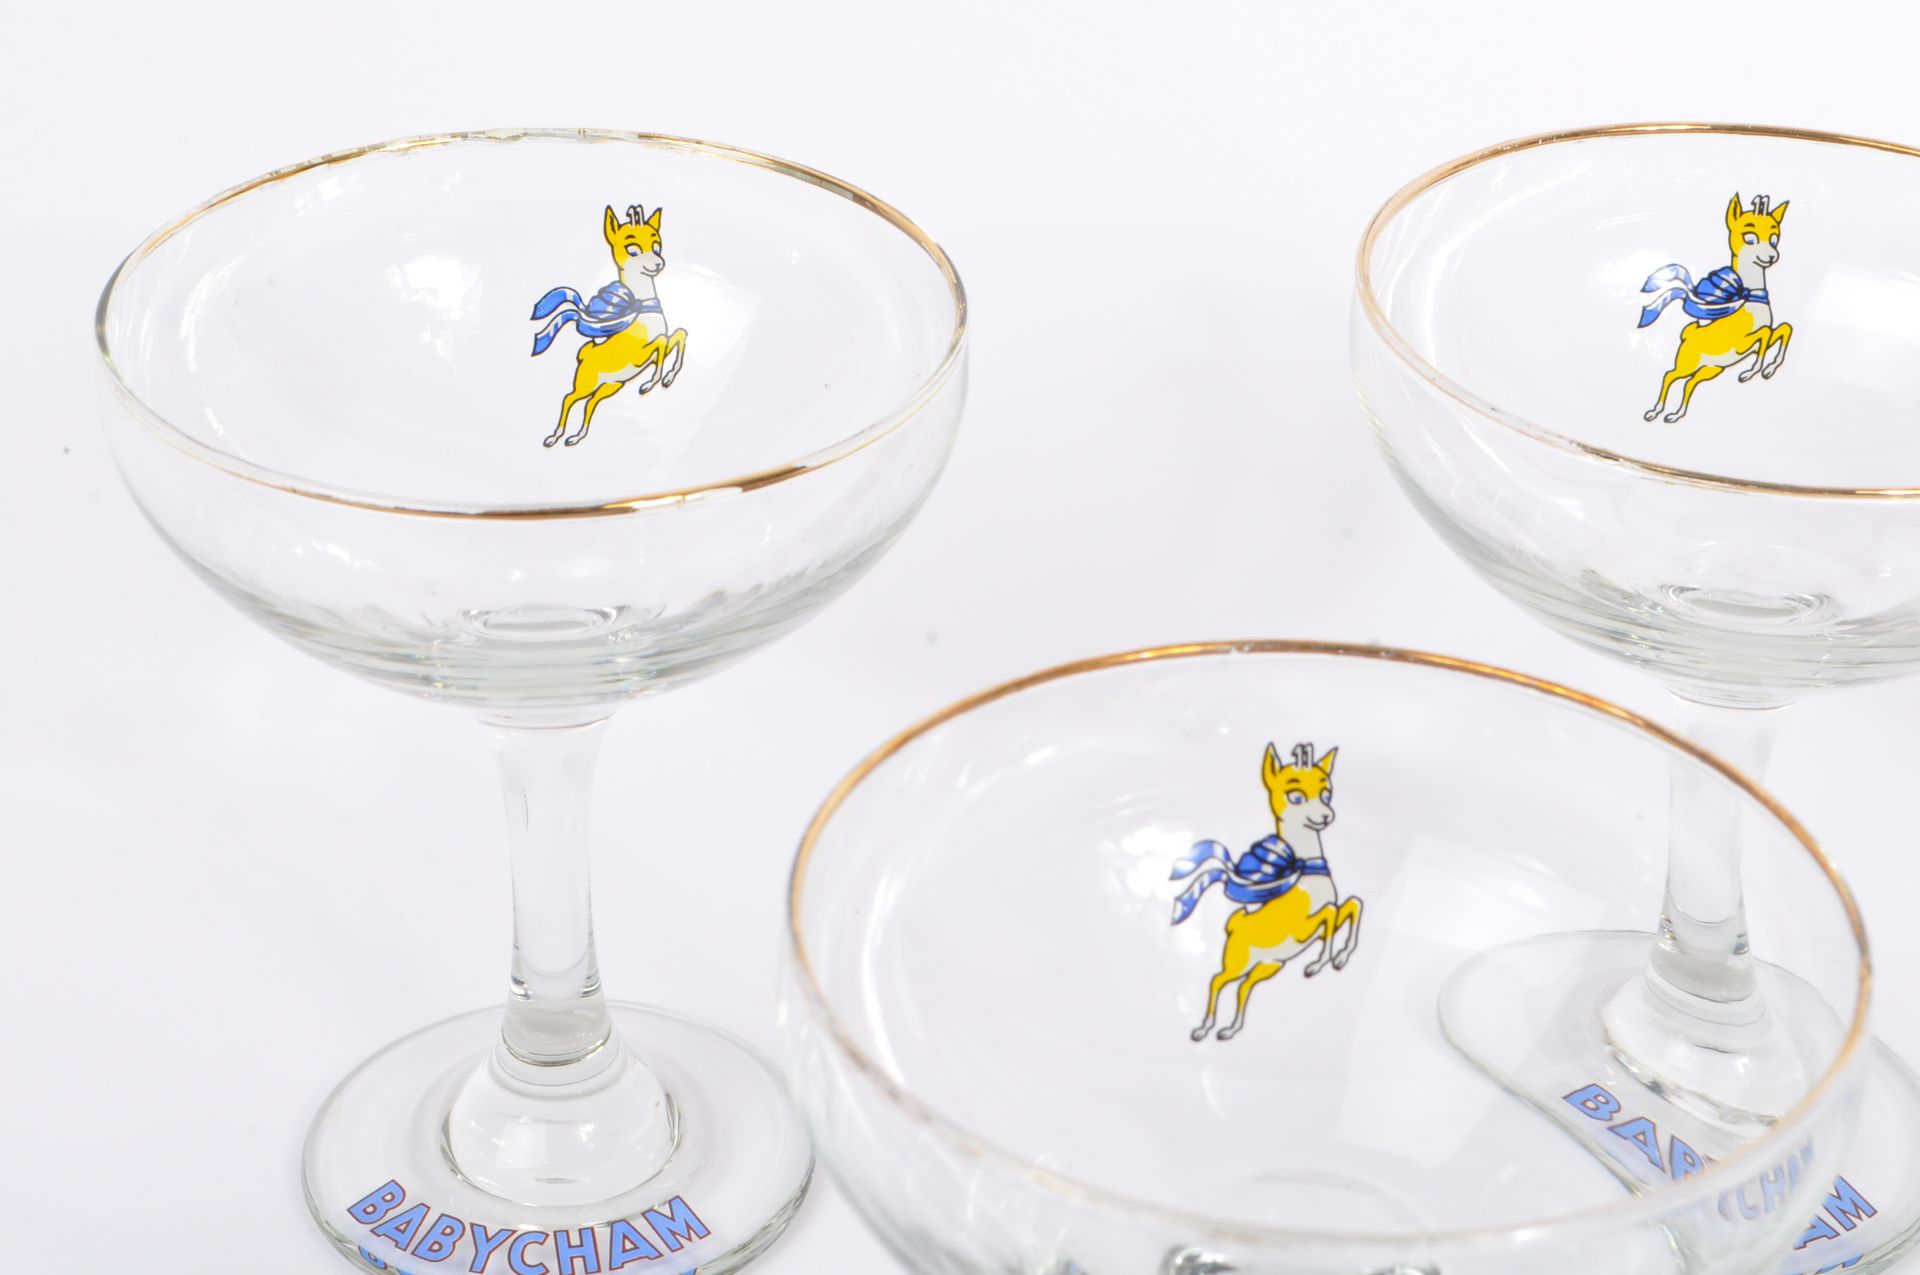 COLLECTION OF SIX VINTAGE 20TH CENTURY BABYCHAM GLASSES - Image 5 of 6